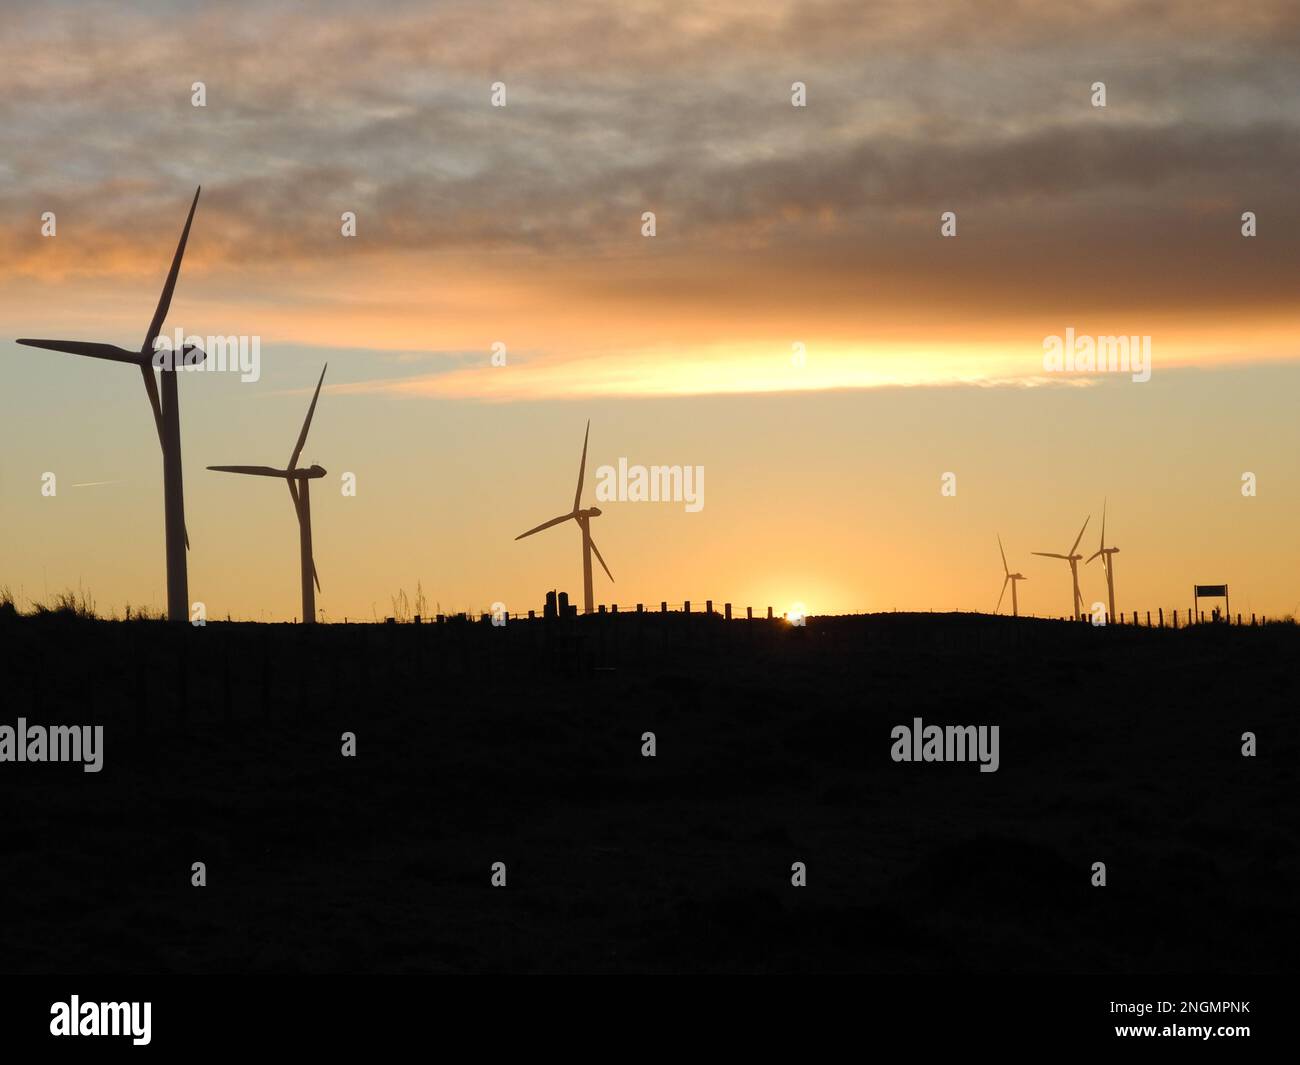 Wind turbines in silhouette against the warm glow of the setting sun on the horizon and with a dark foreground Stock Photo